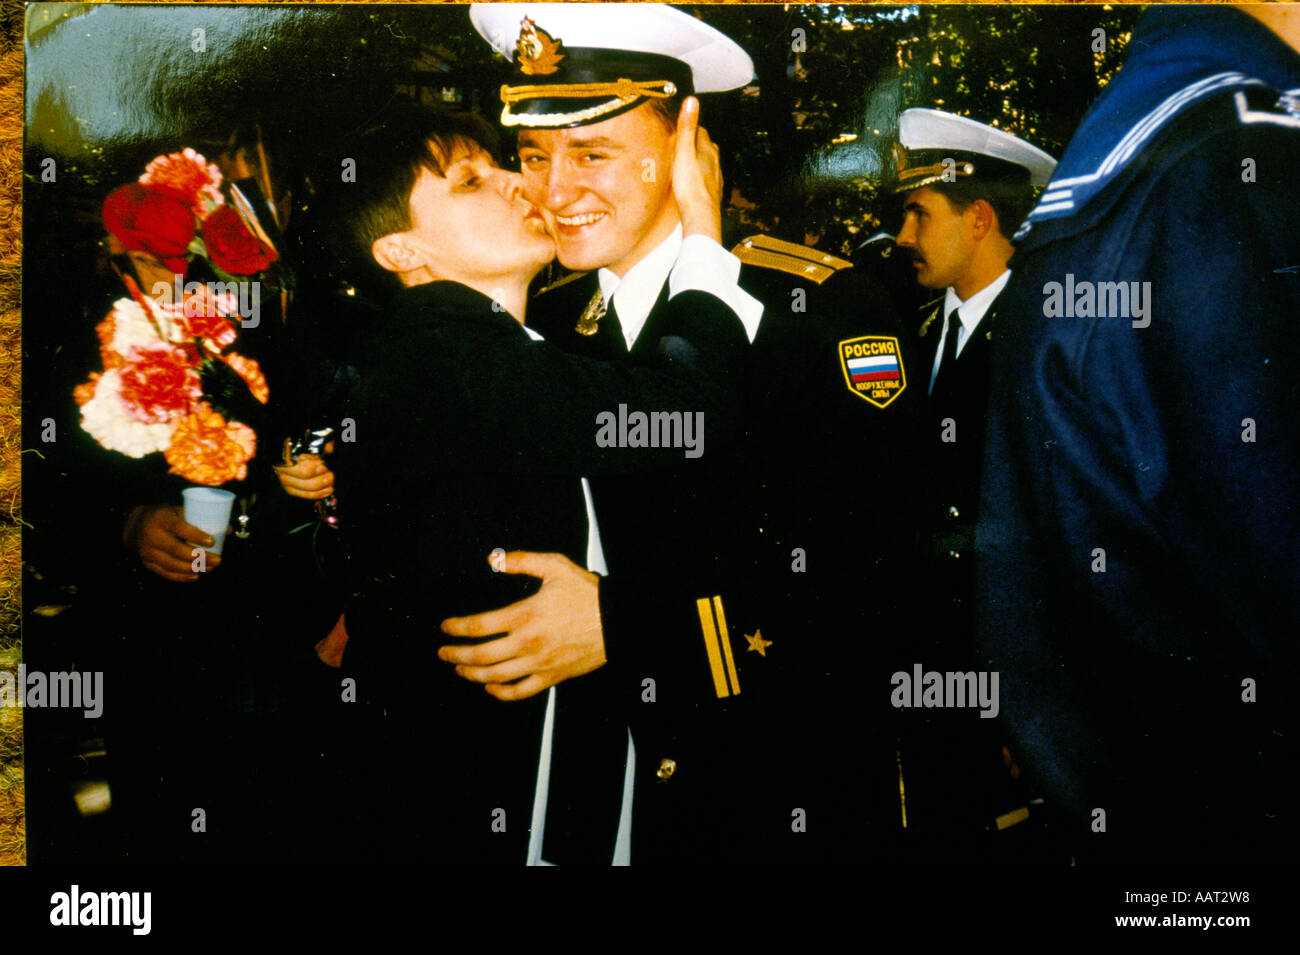 WIDOWS OF THE KURSK FAMILY PHOTO OF SERGEI TYLIK BEING KISSED BY HIS MOTHER WHO IS NOW CAMPAIGNING FOR JUSTICE 2001 Stock Photo